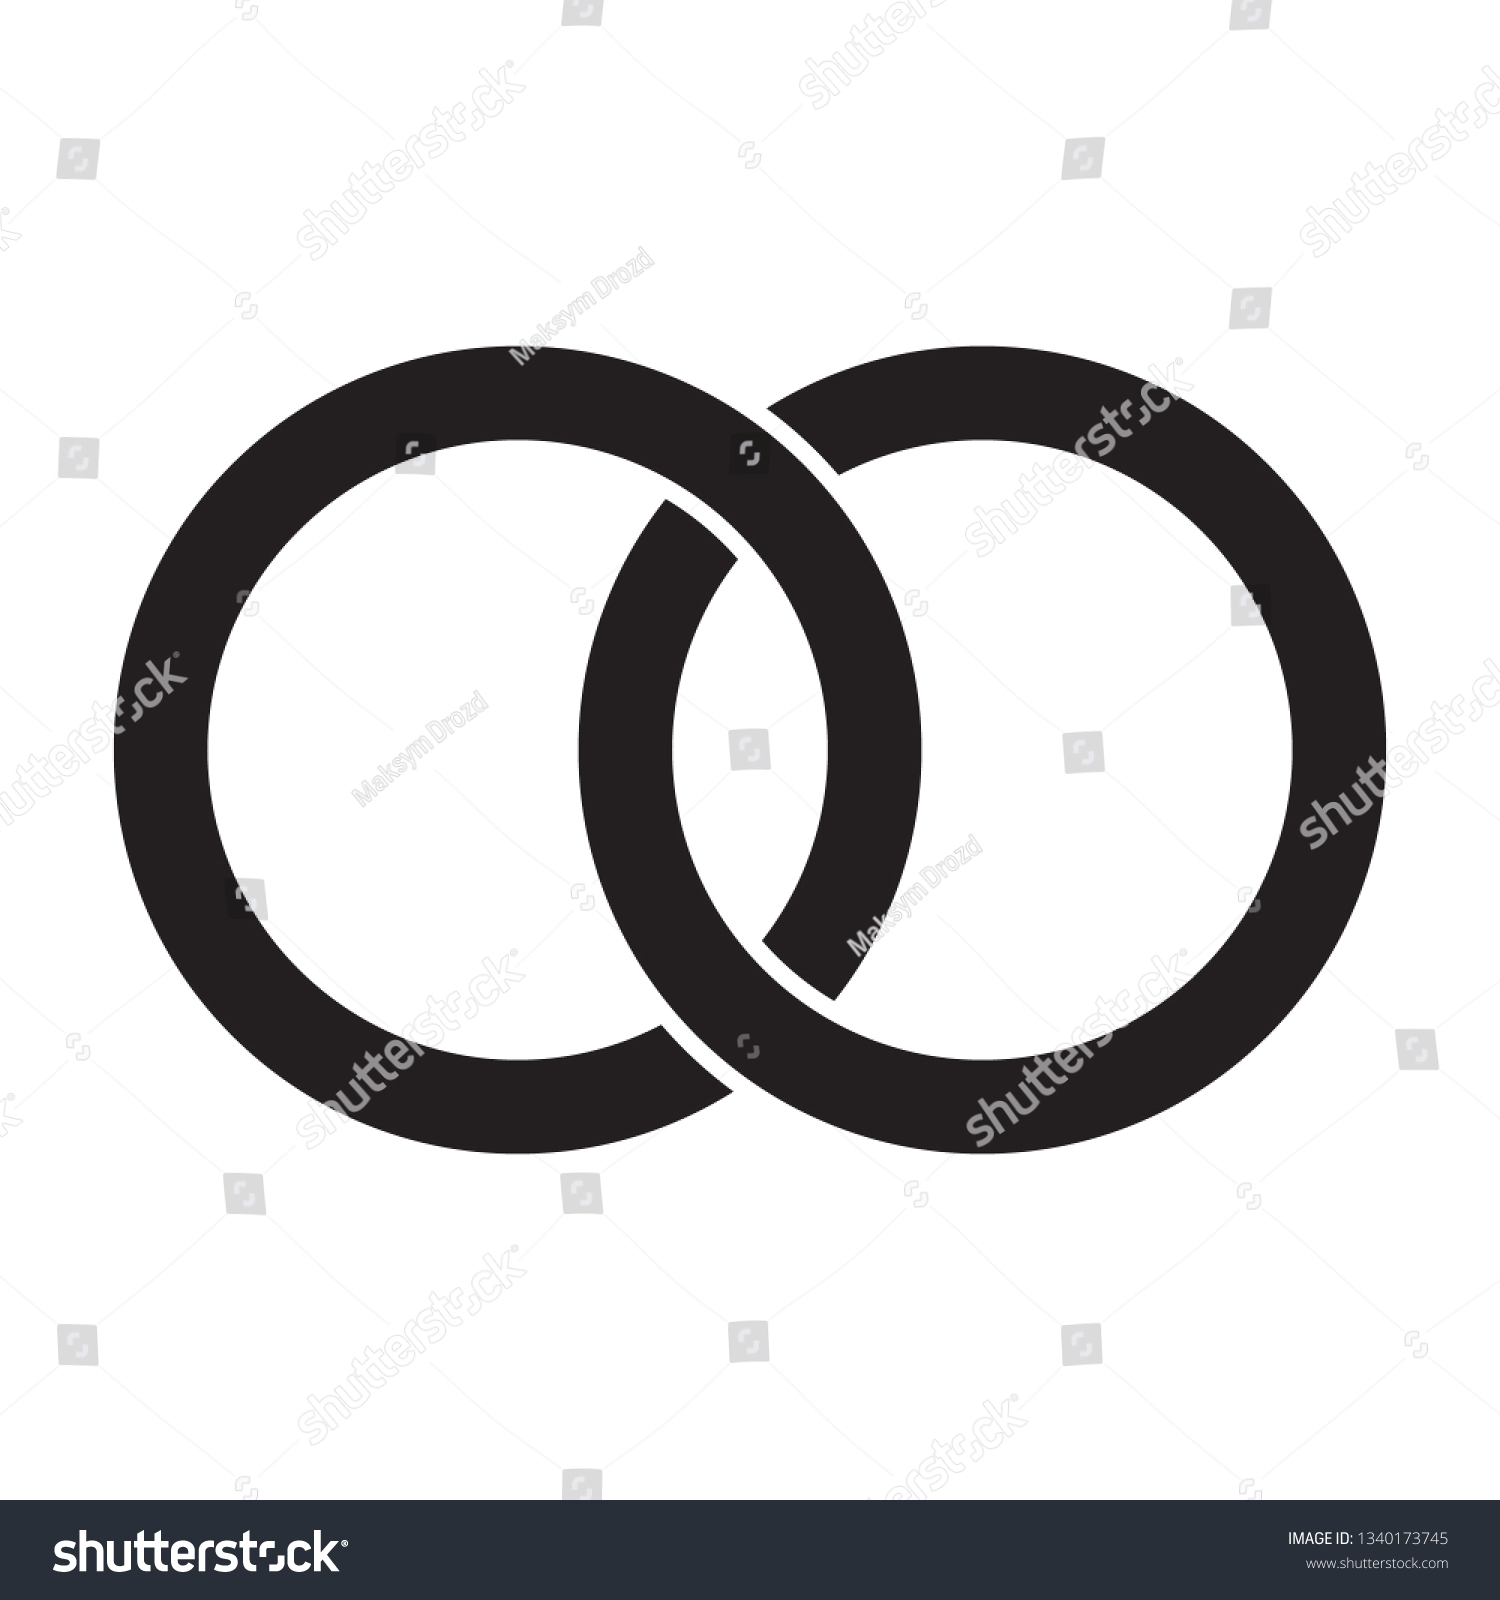 Wedding rings linked Images, Stock Photos & Vectors | Shutterstock